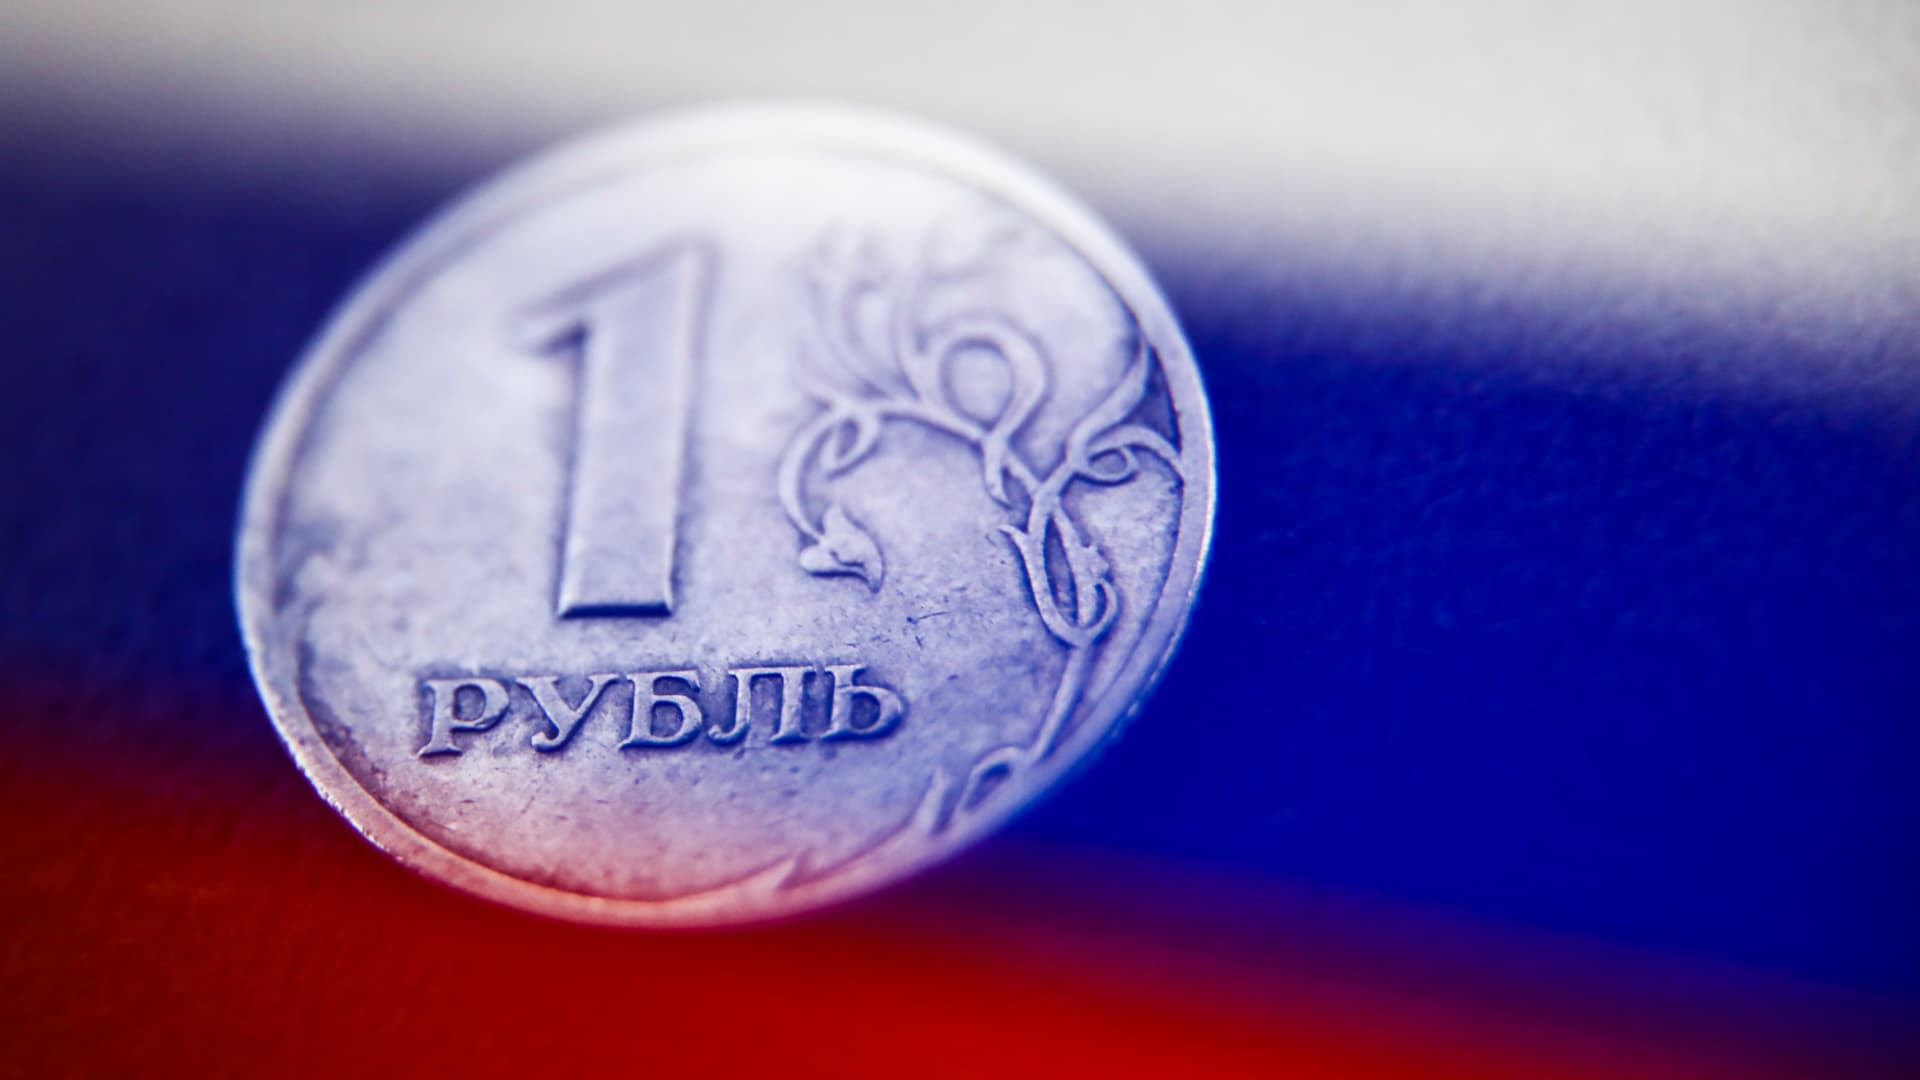 Russia’s ruble is at its strongest level in 7 years despite sanctions